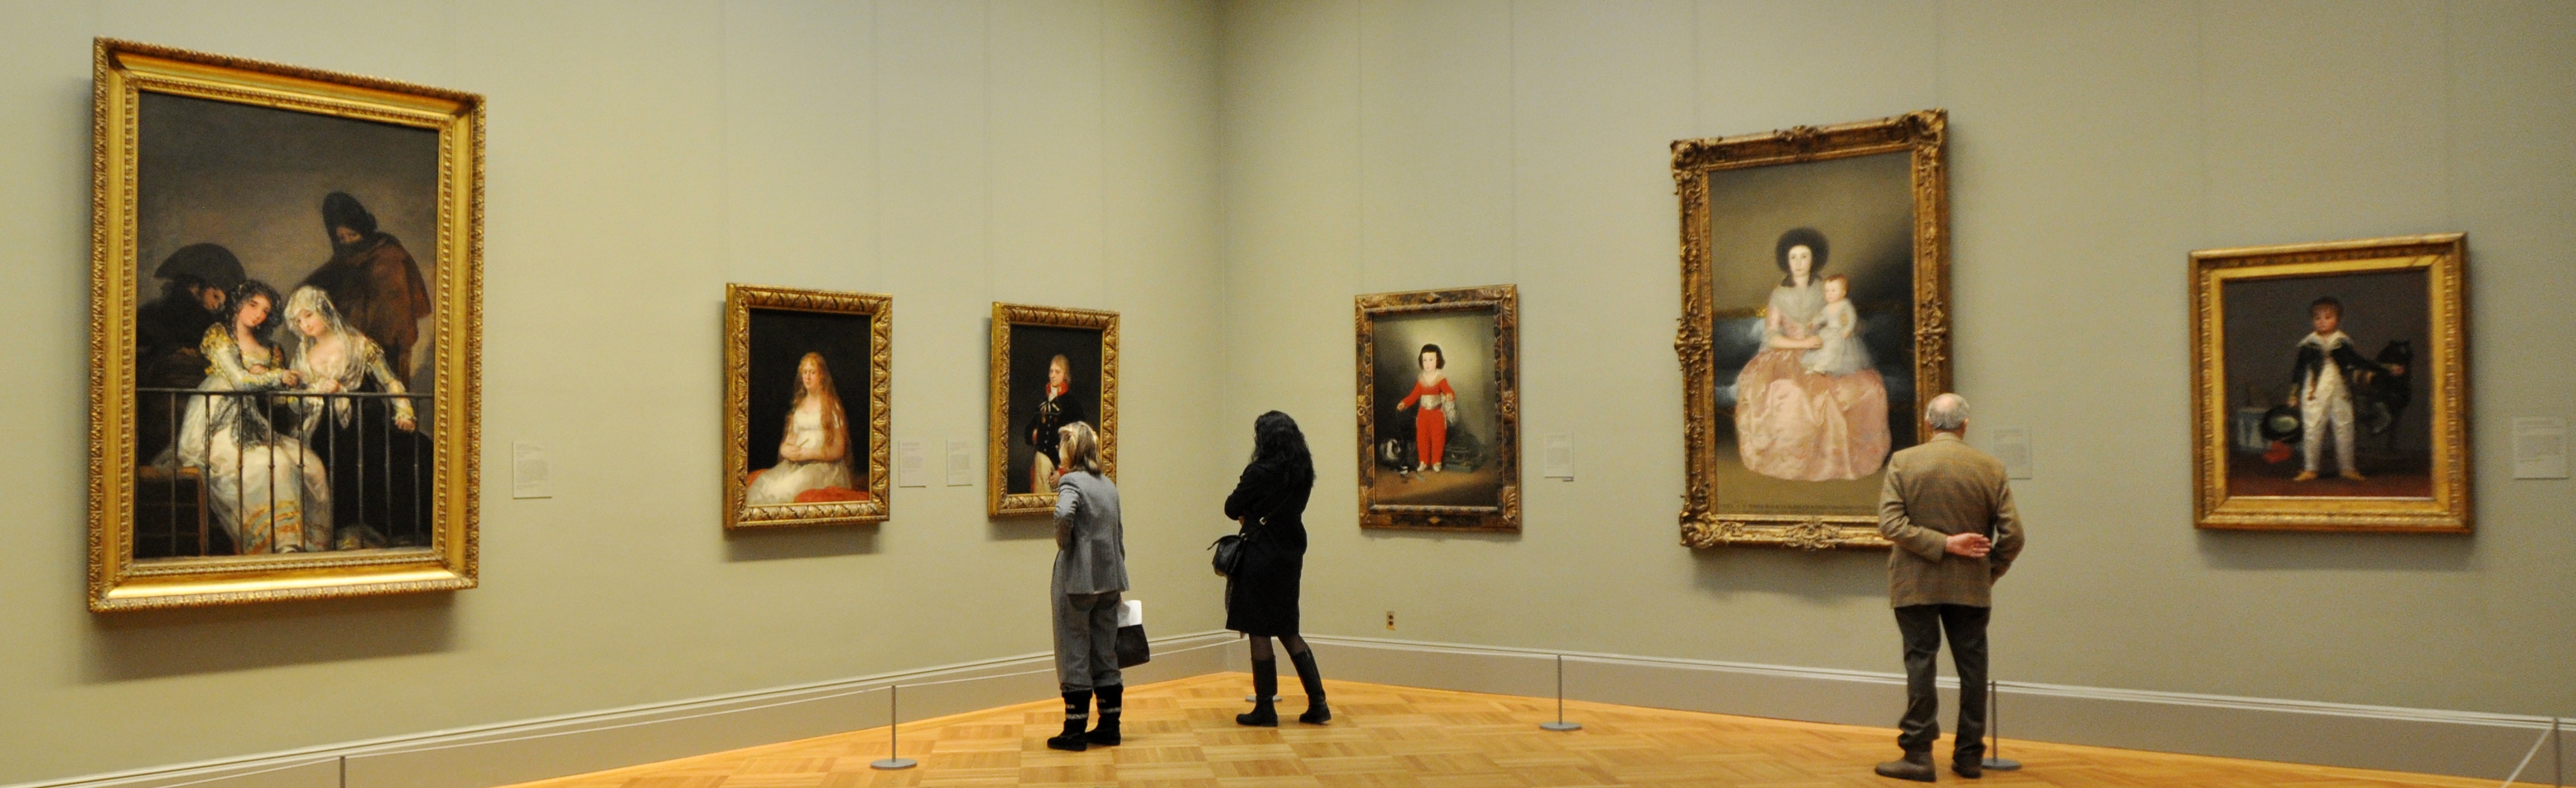 Metropolitan Museum of Art, New York: The Goldfinch by Donna Tartt and